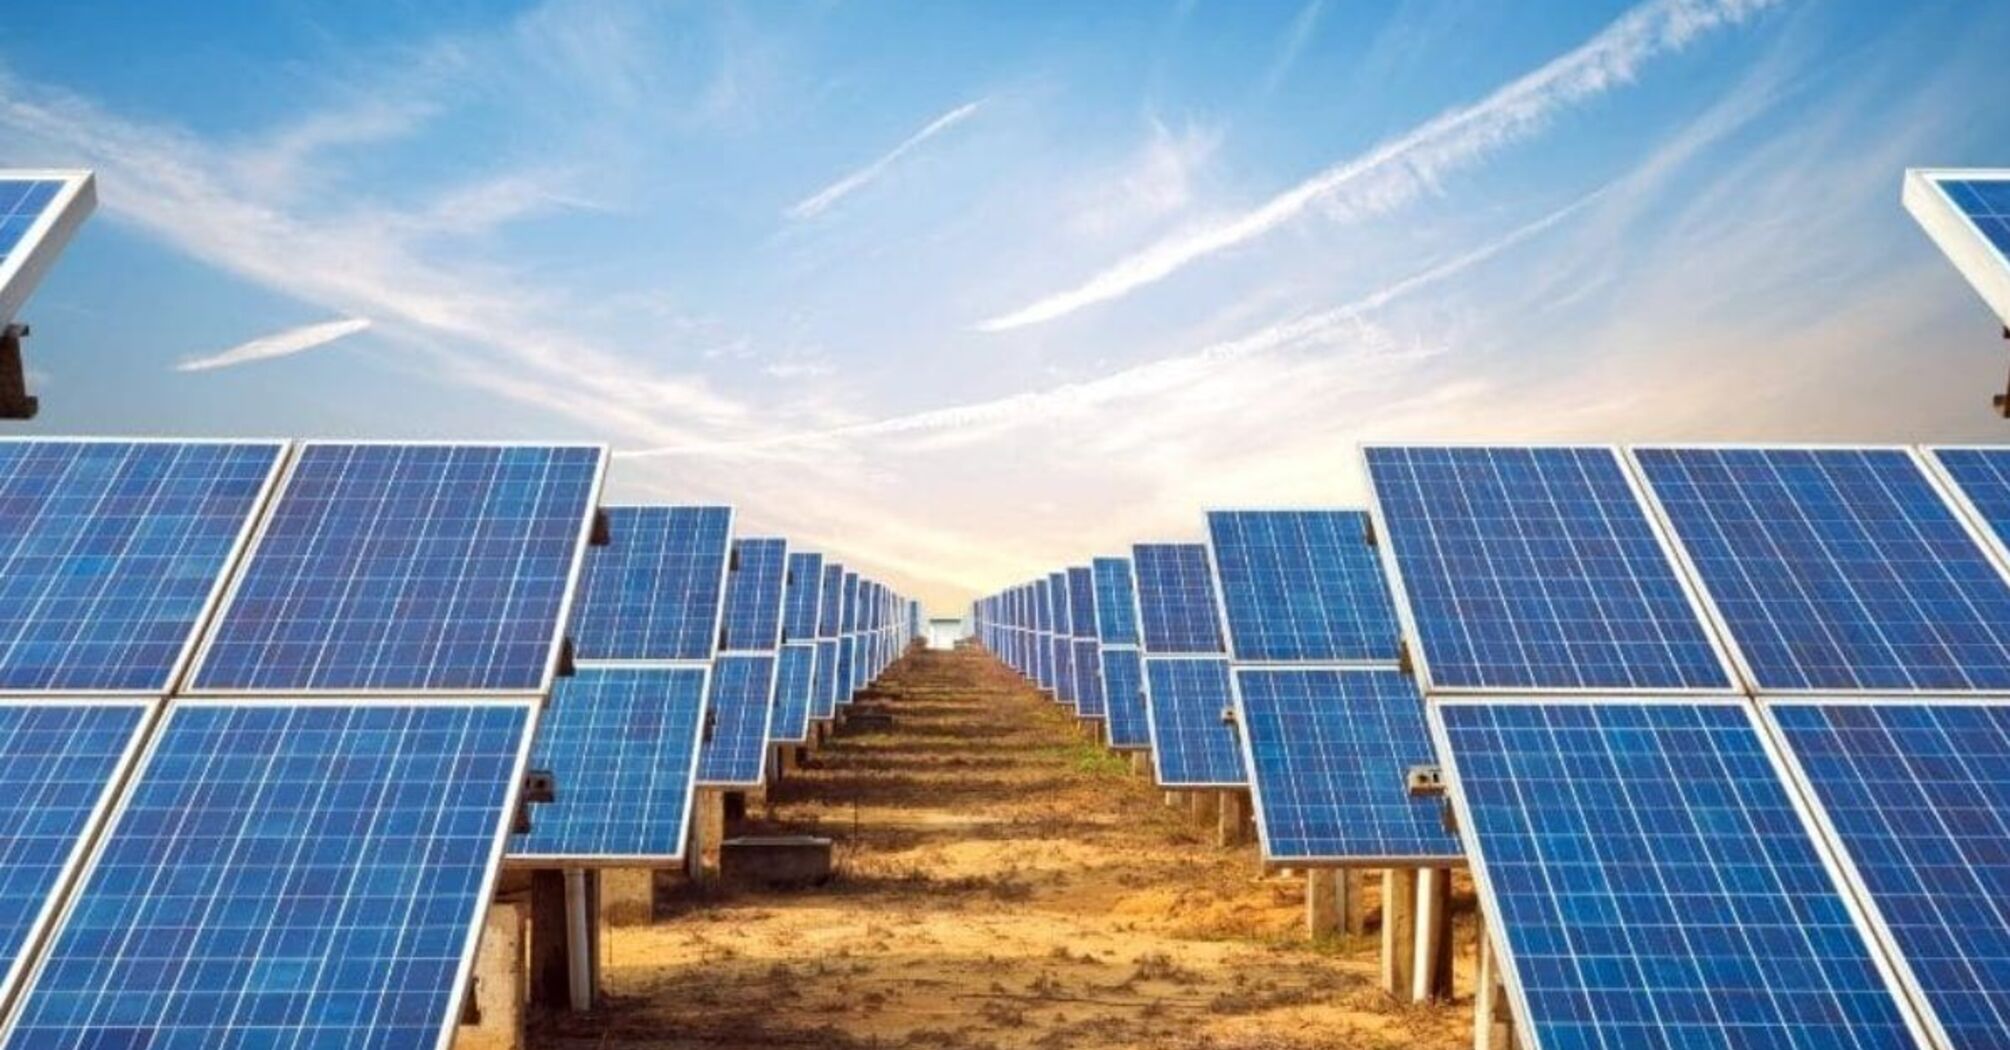 Five fascinating facts about solar energy